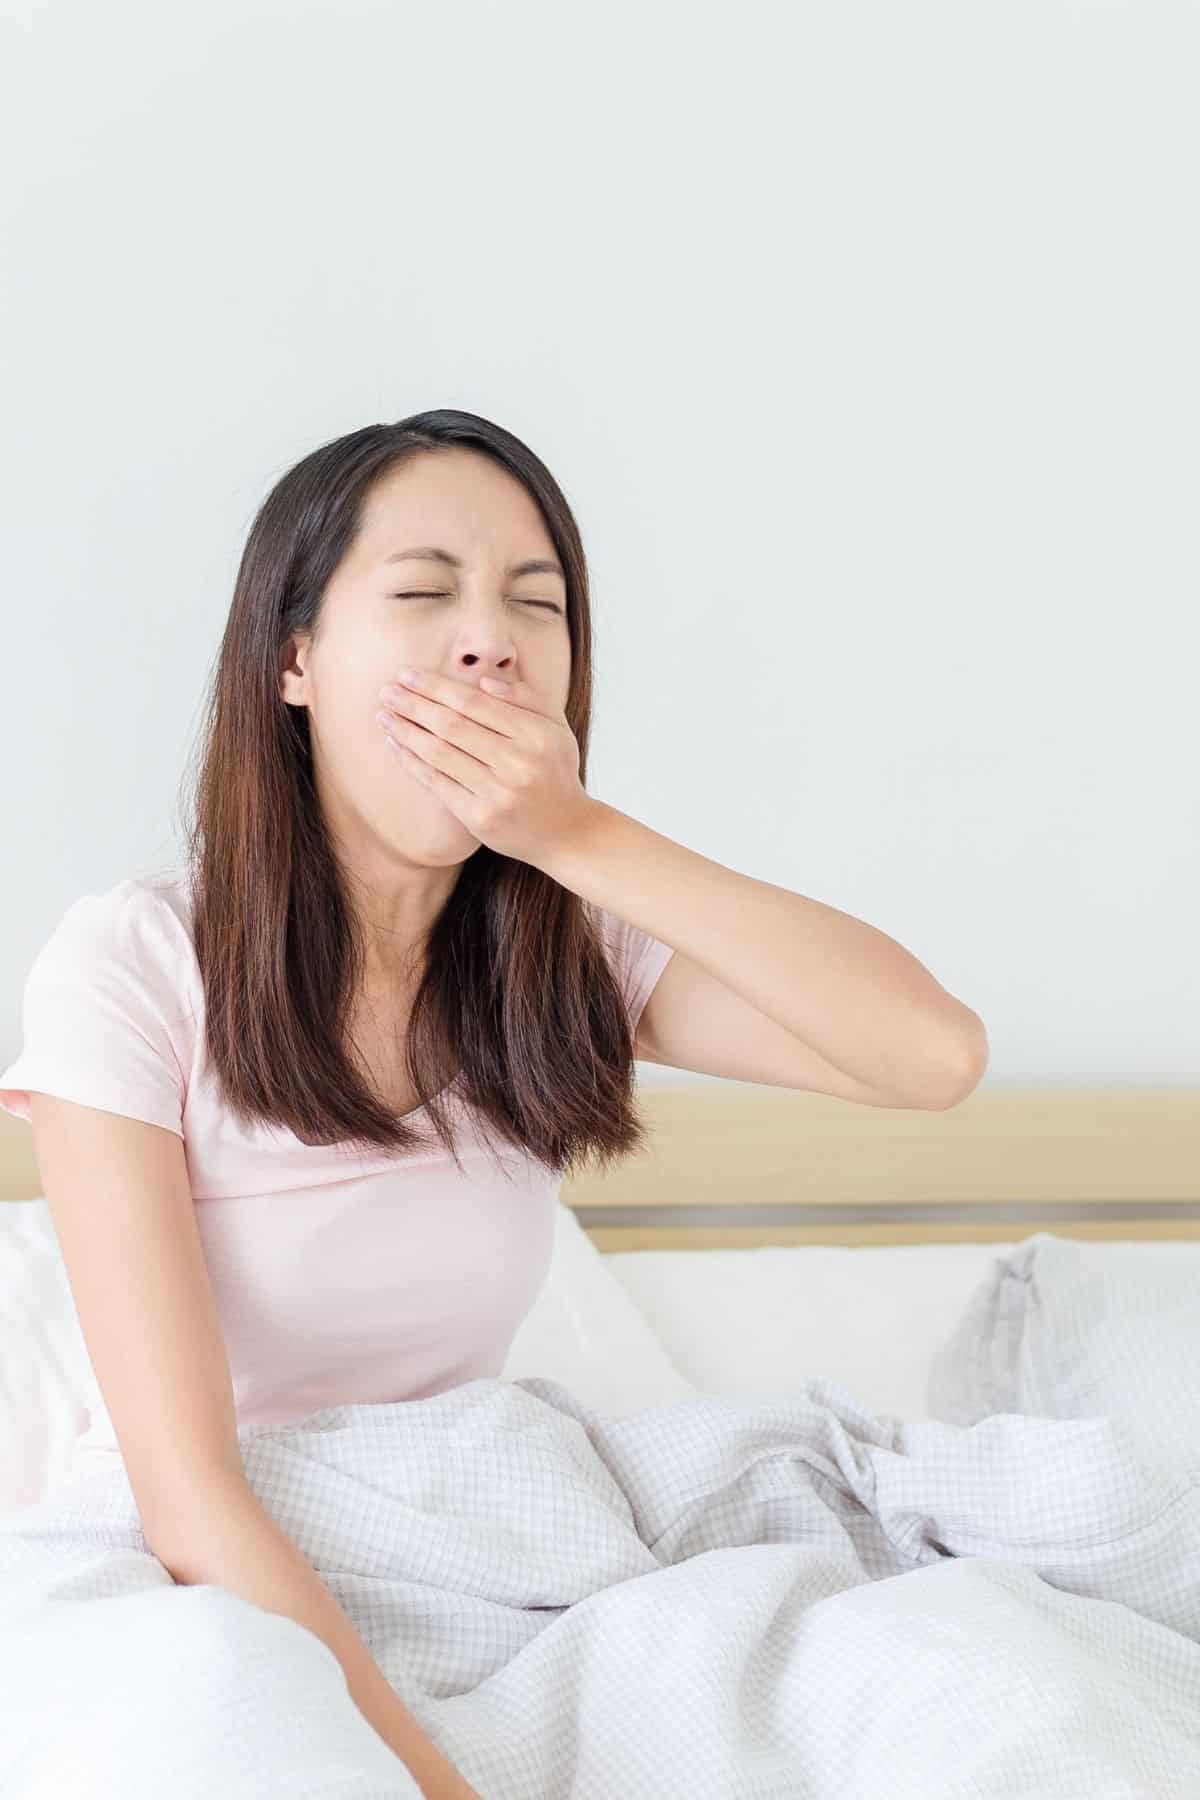 woman in bed yawning